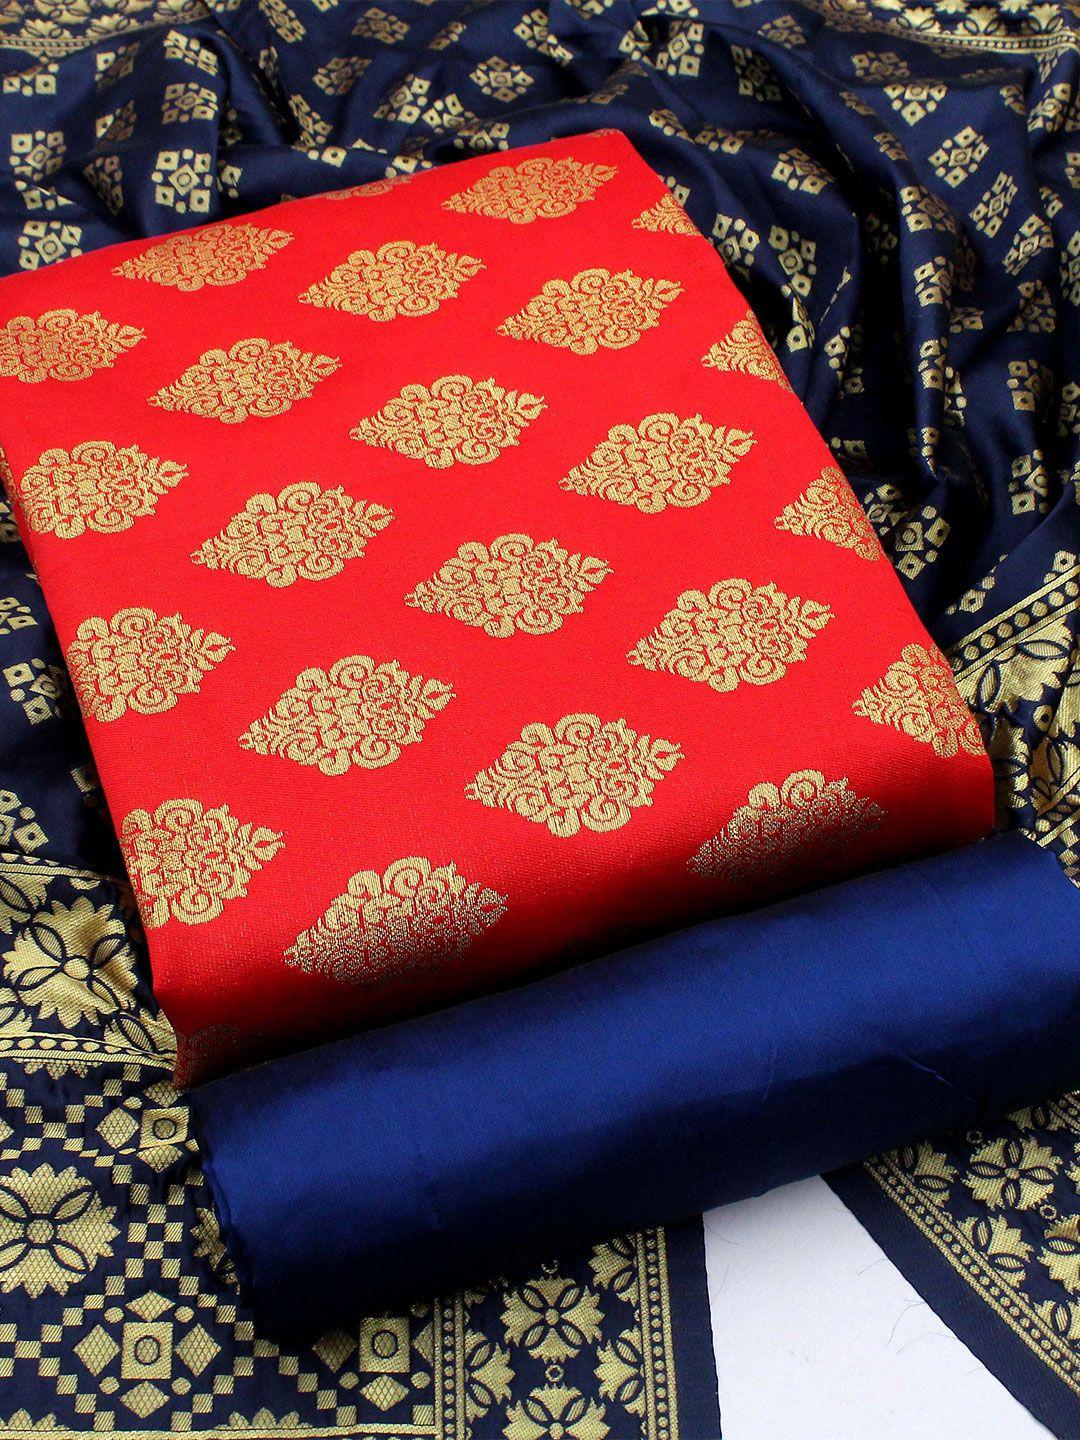 manvaa red unstitched dress material